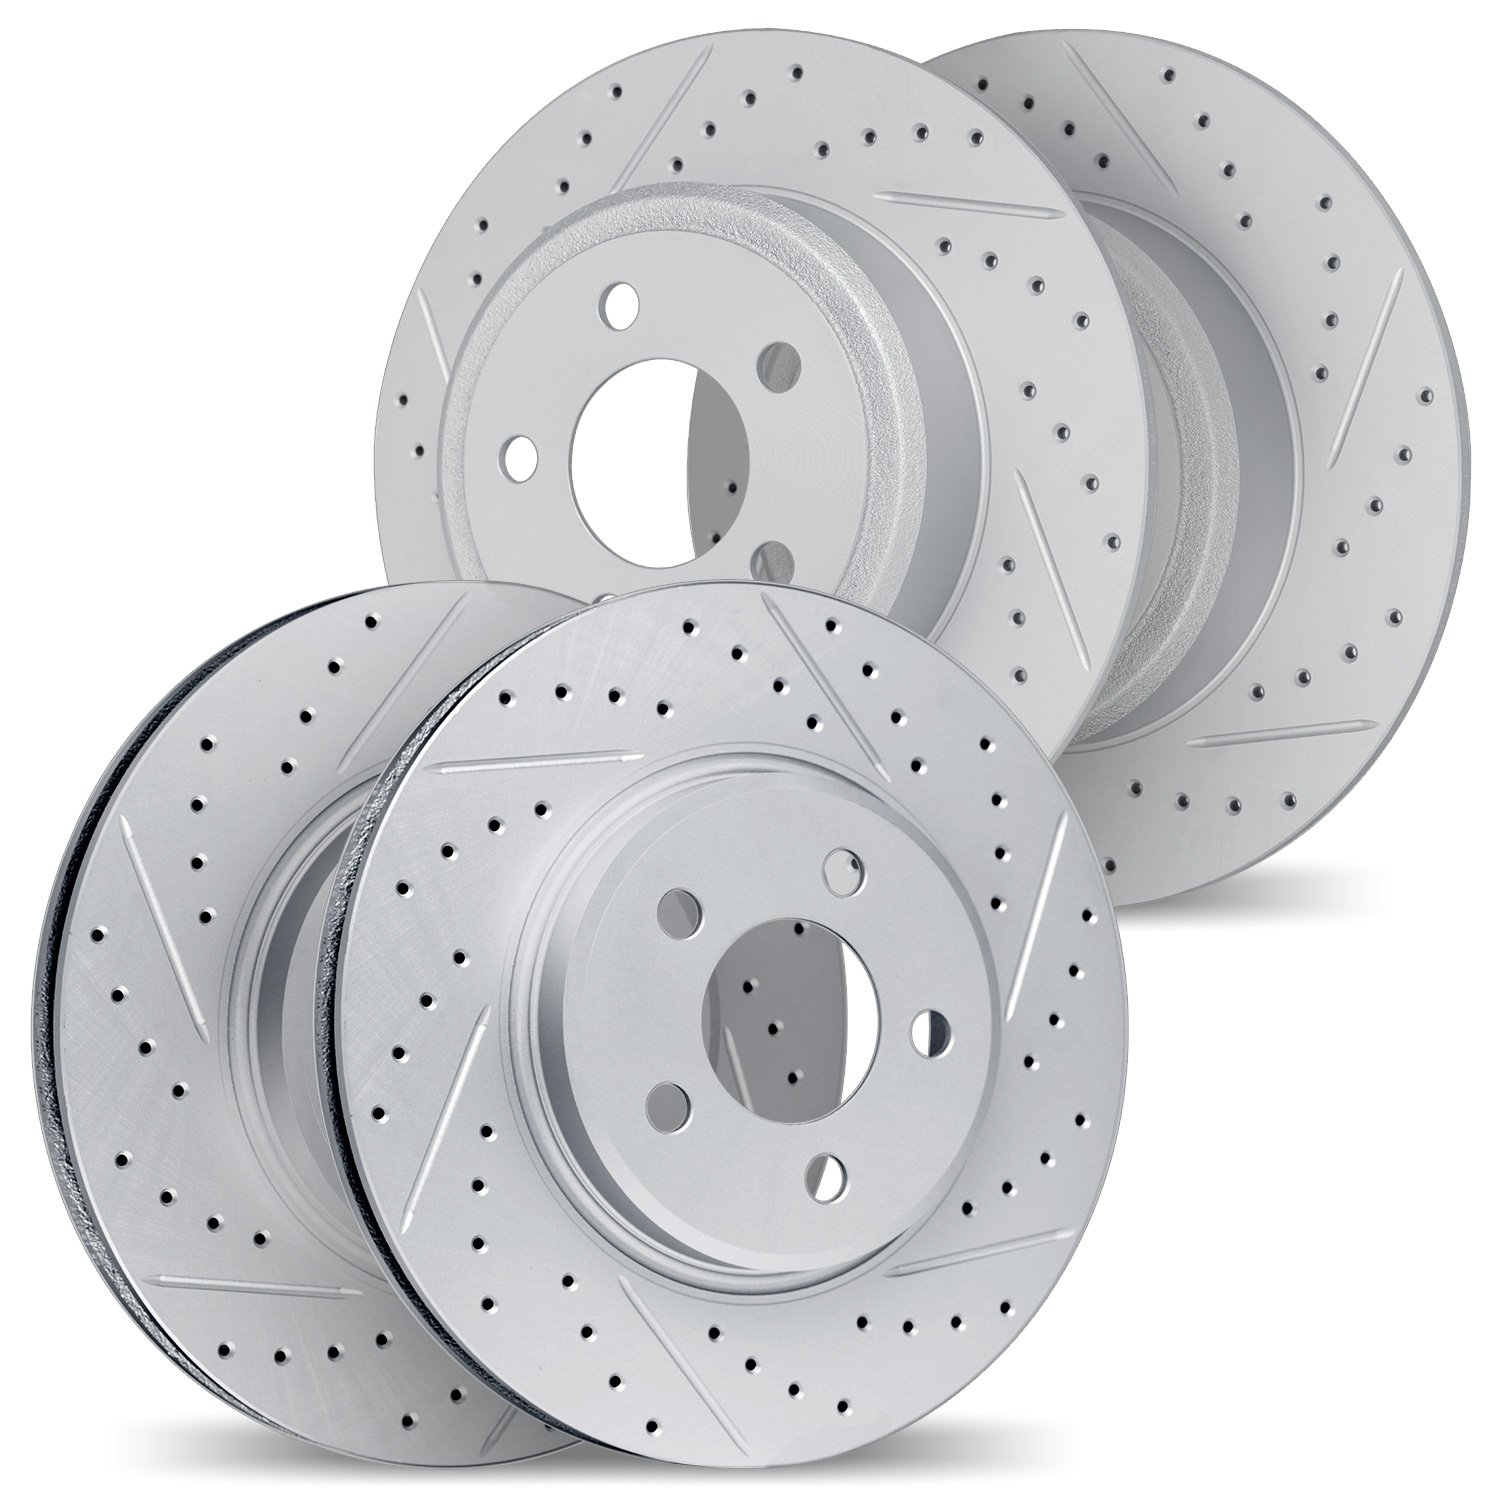 2004-54060 Geoperformance Drilled/Slotted Brake Rotors, 1997-2002 Ford/Lincoln/Mercury/Mazda, Position: Front and Rear